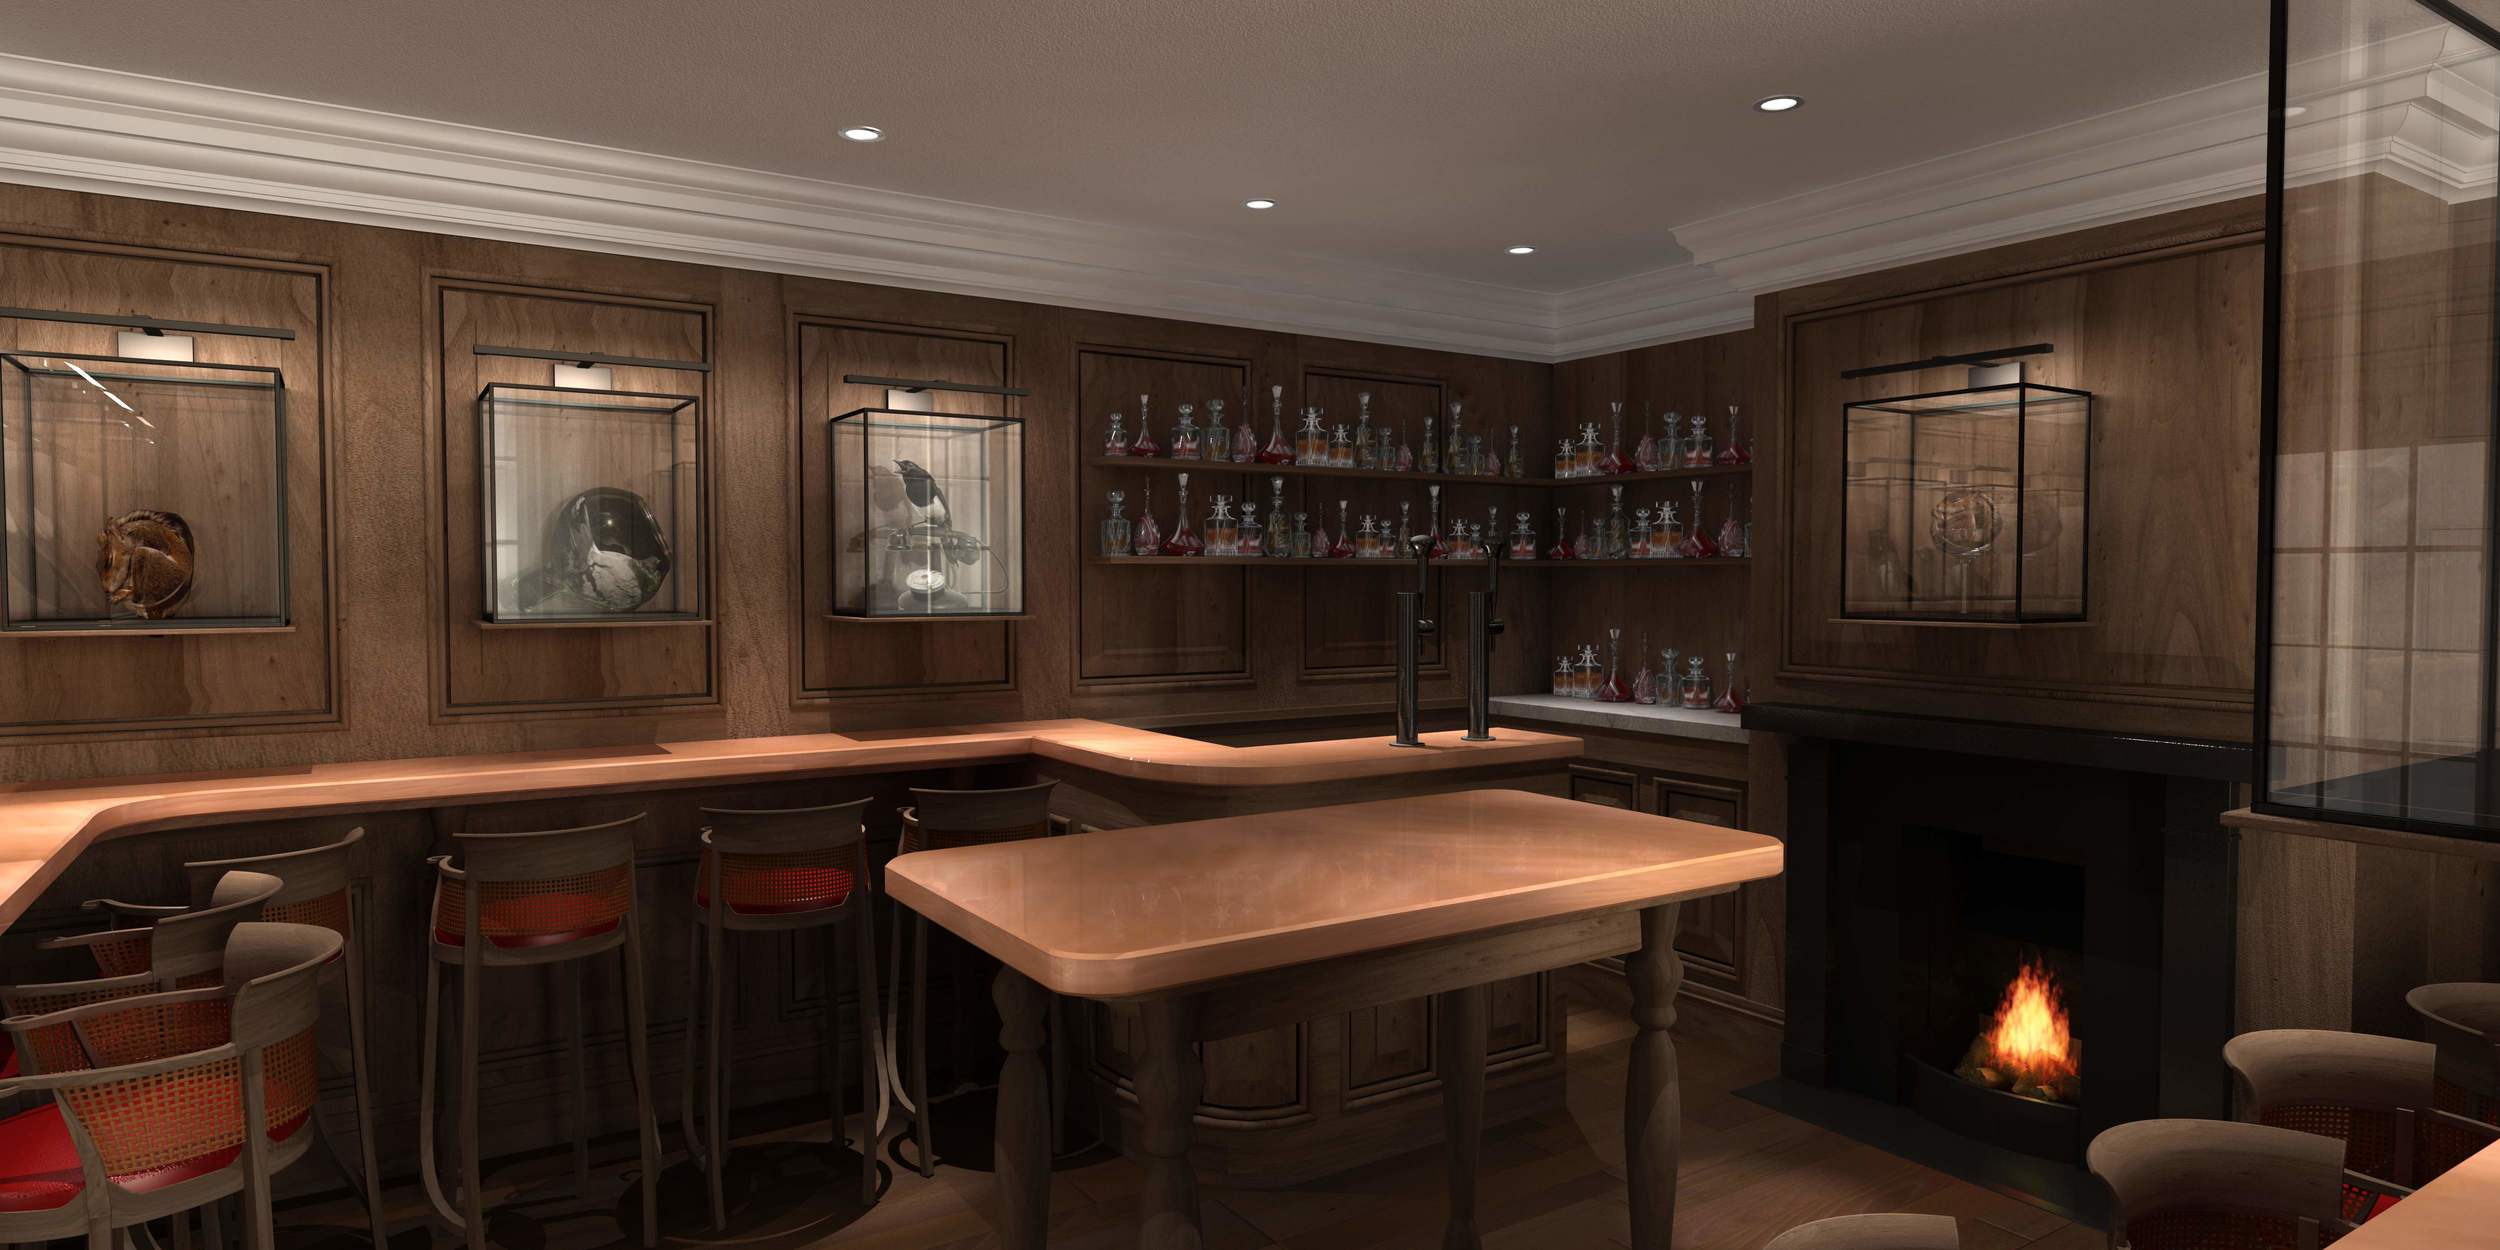 Jarvis_Design_CGI_Dunhill_Public_House_Mayfair_View_1_Option_B_HIGH_RES.jpg